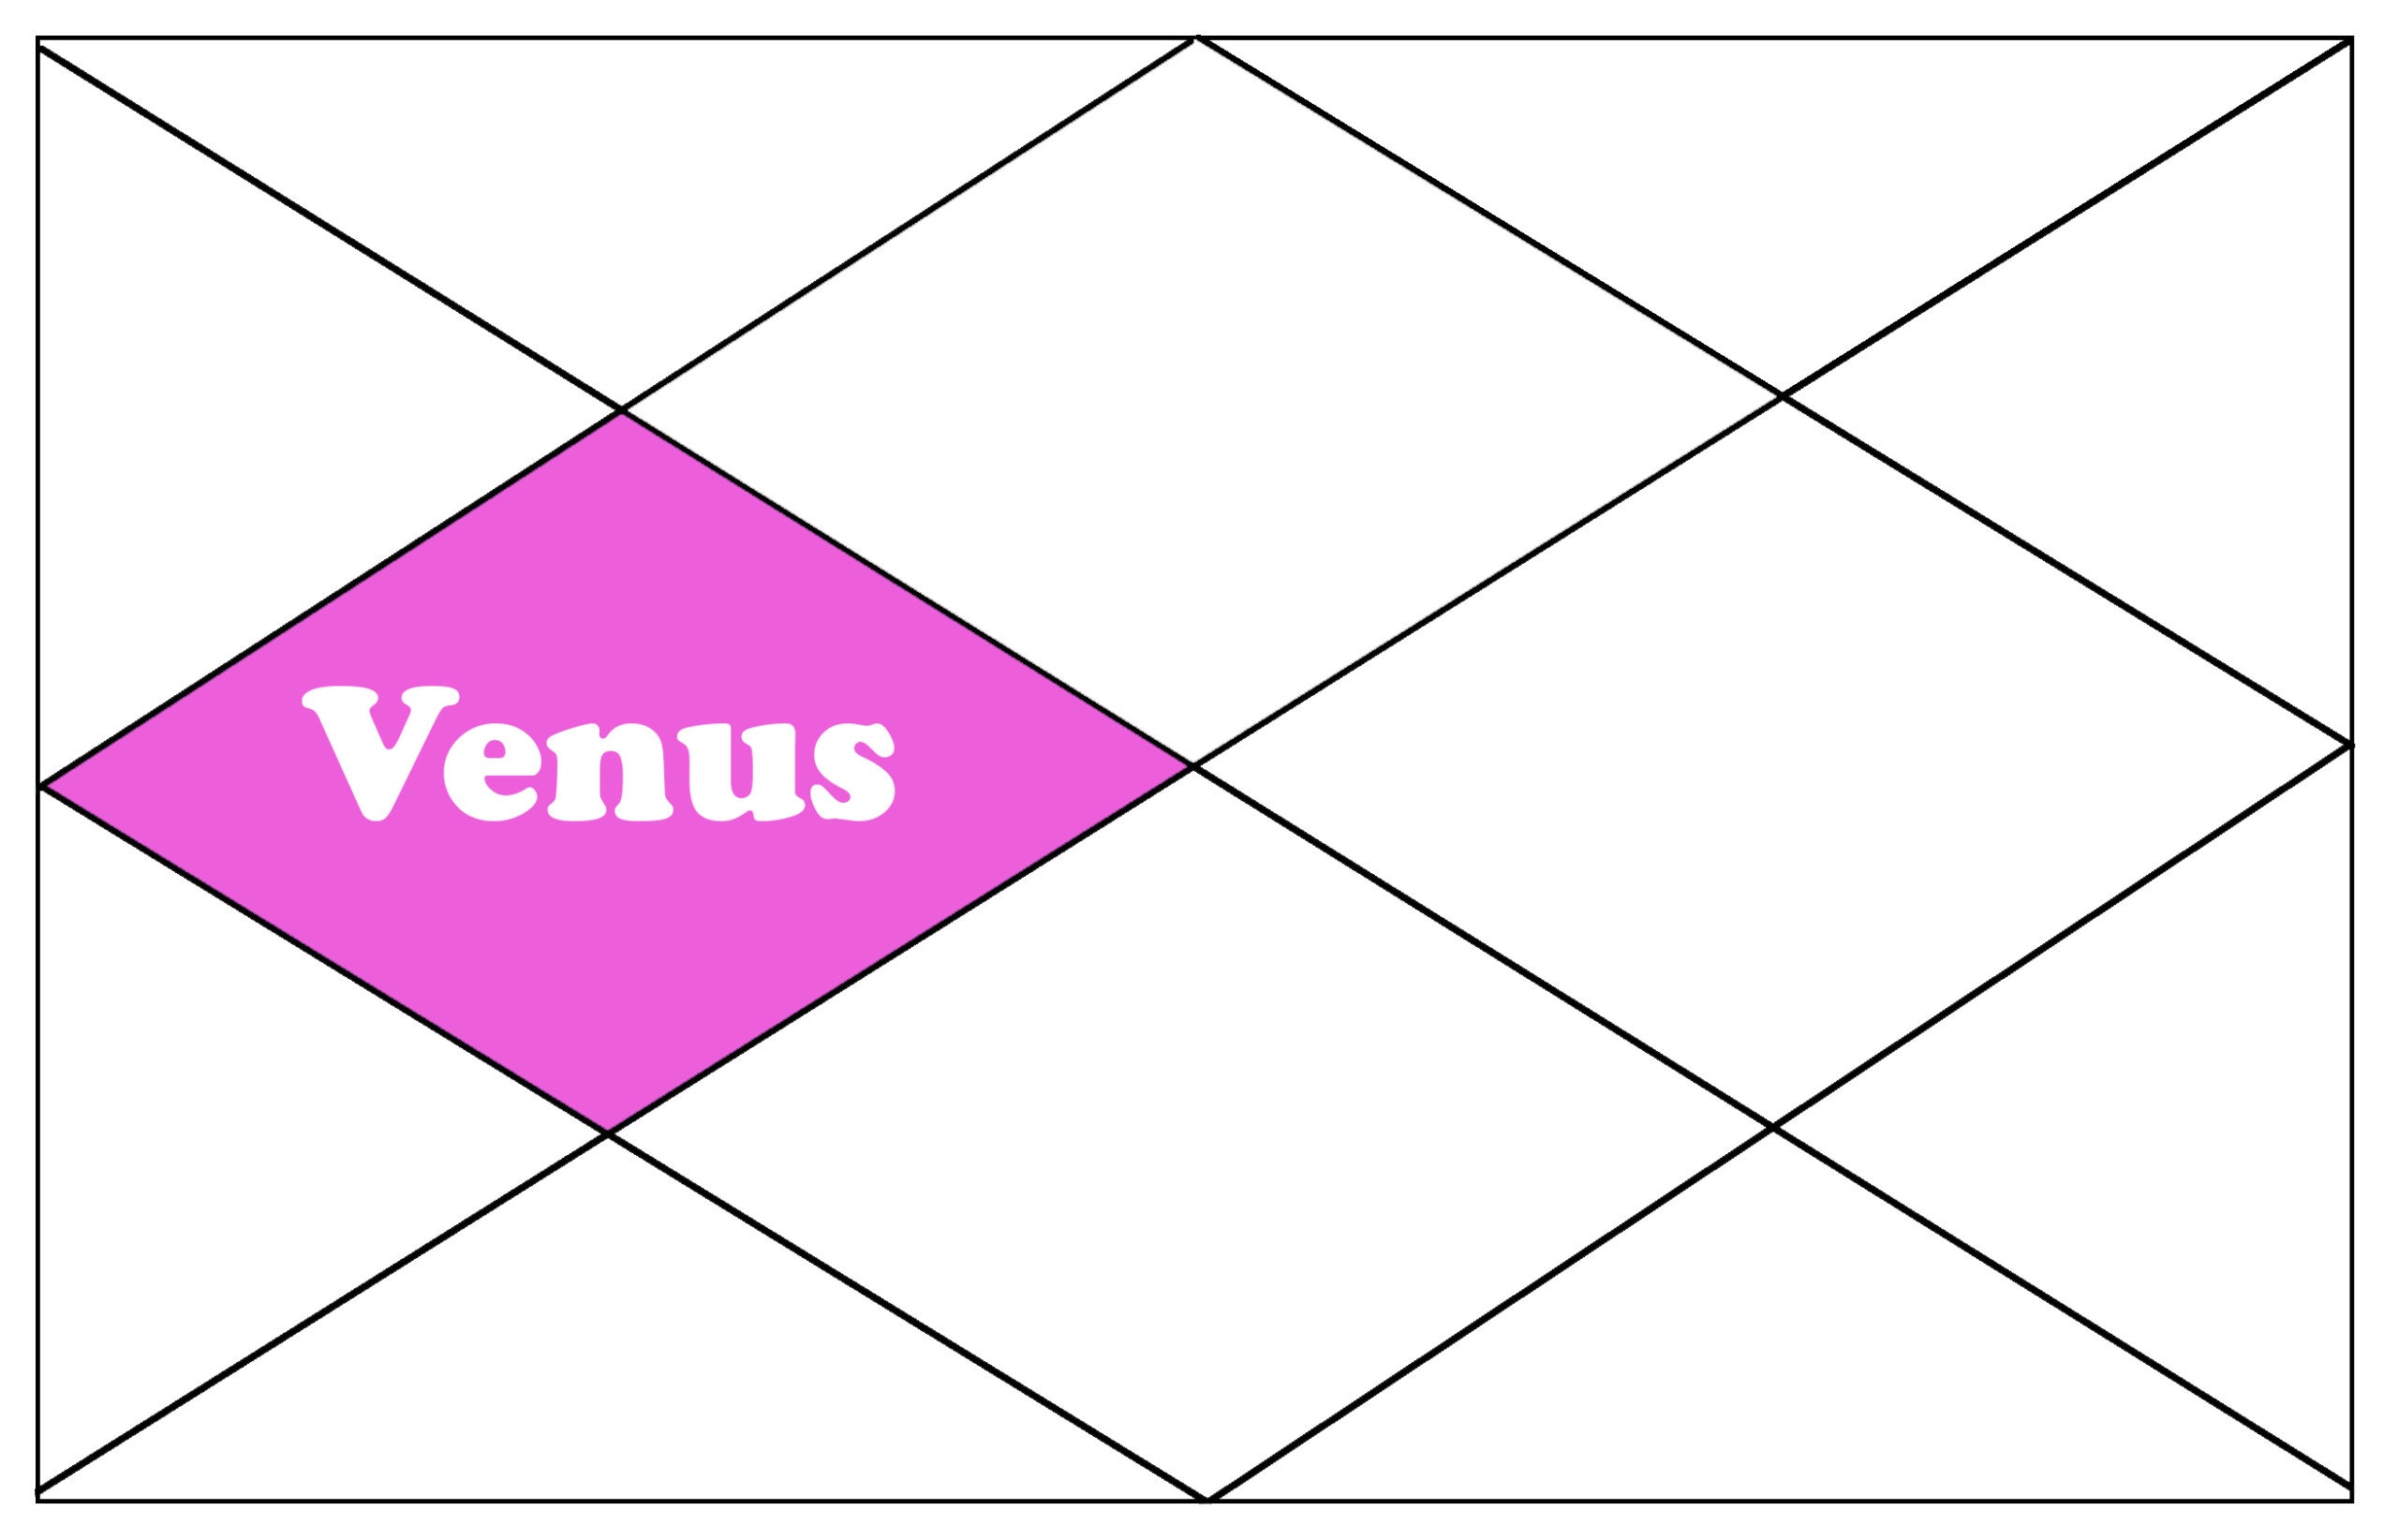 Venus in the 4th house